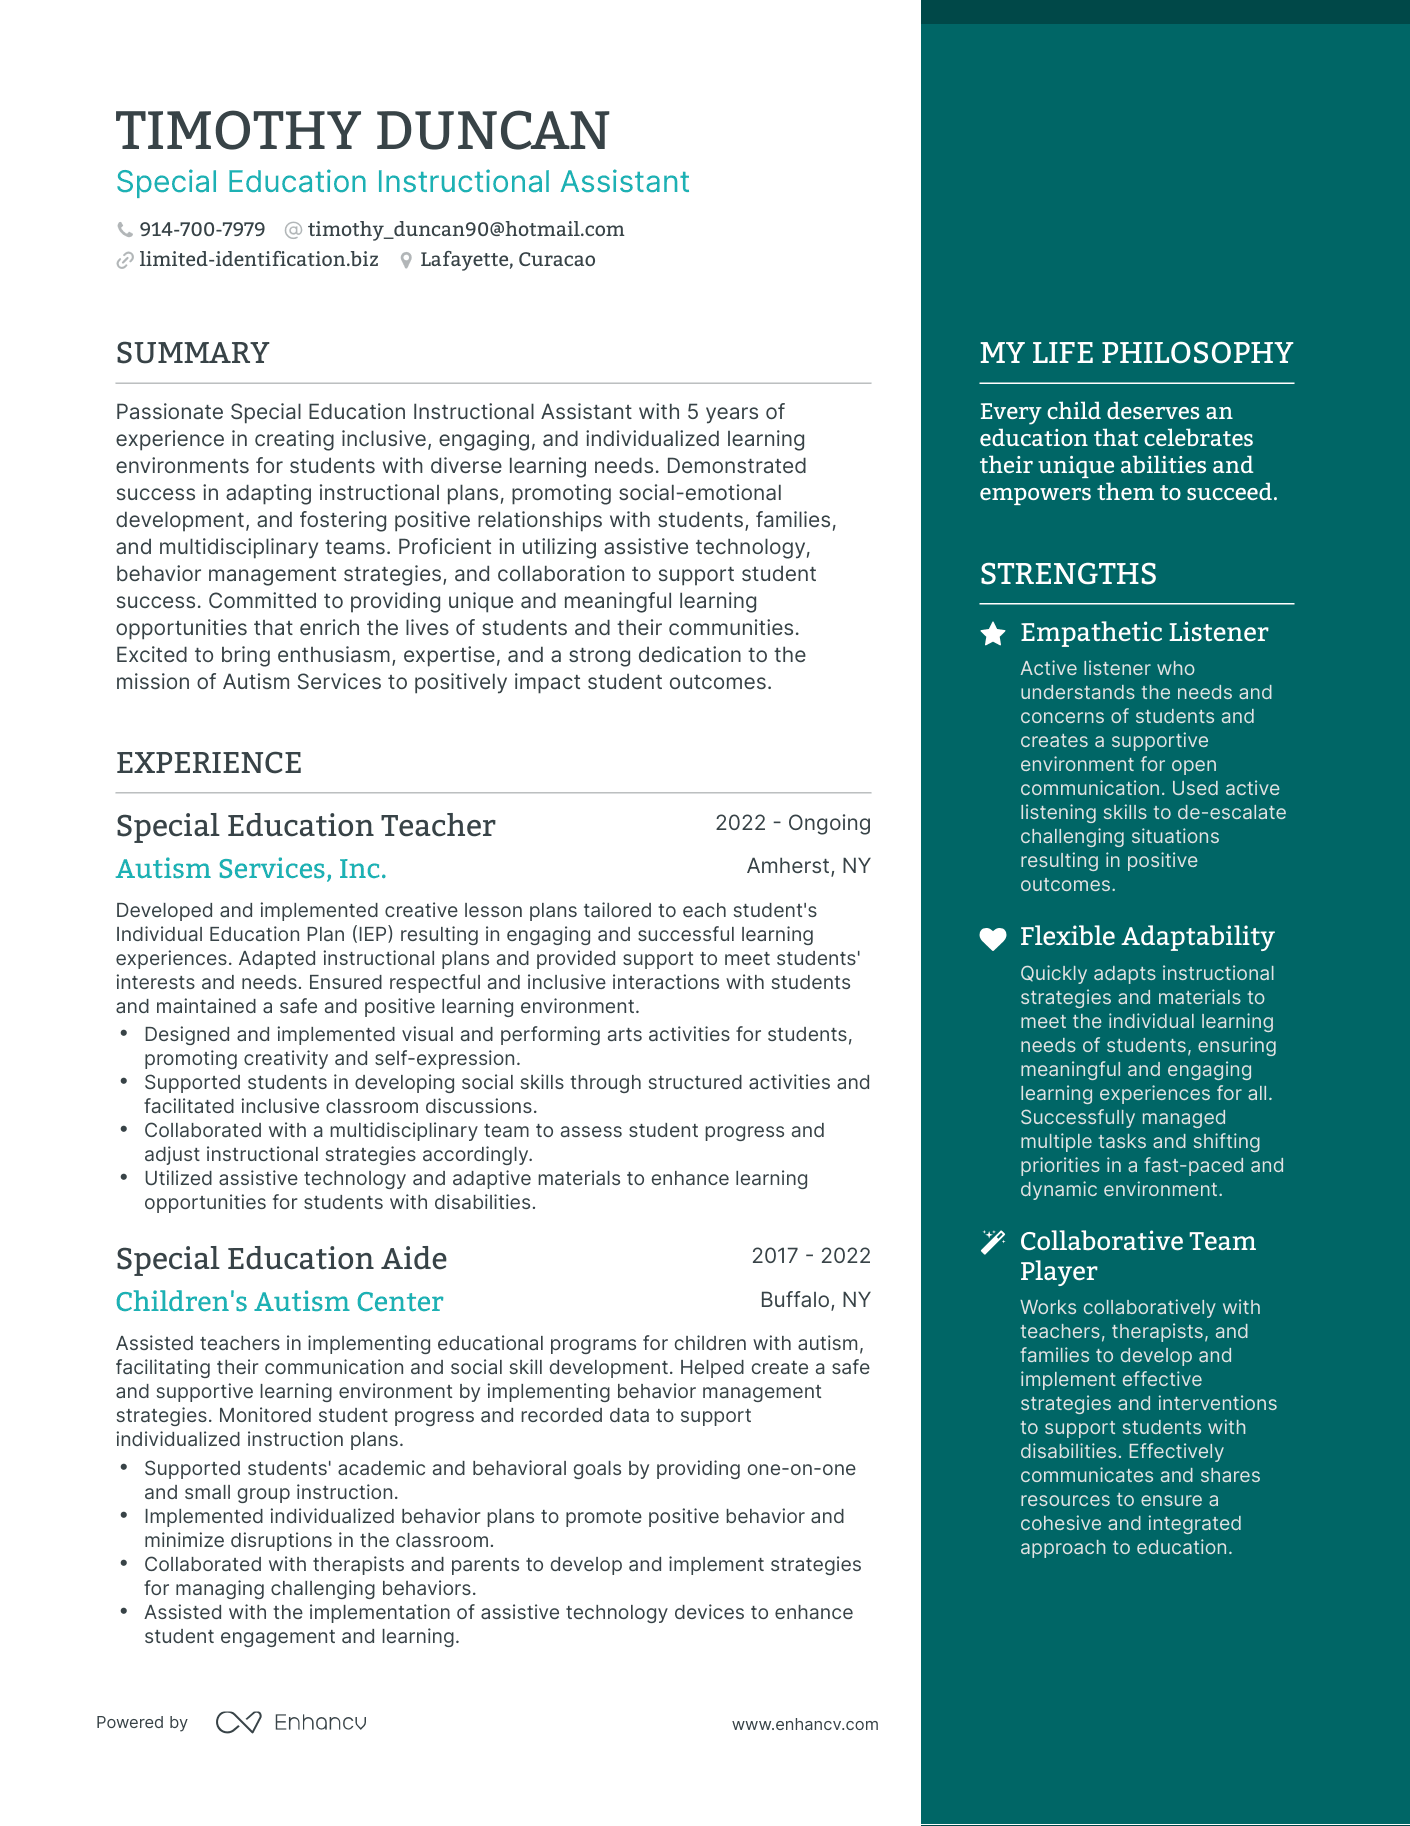 Special Education Instructional Assistant resume example